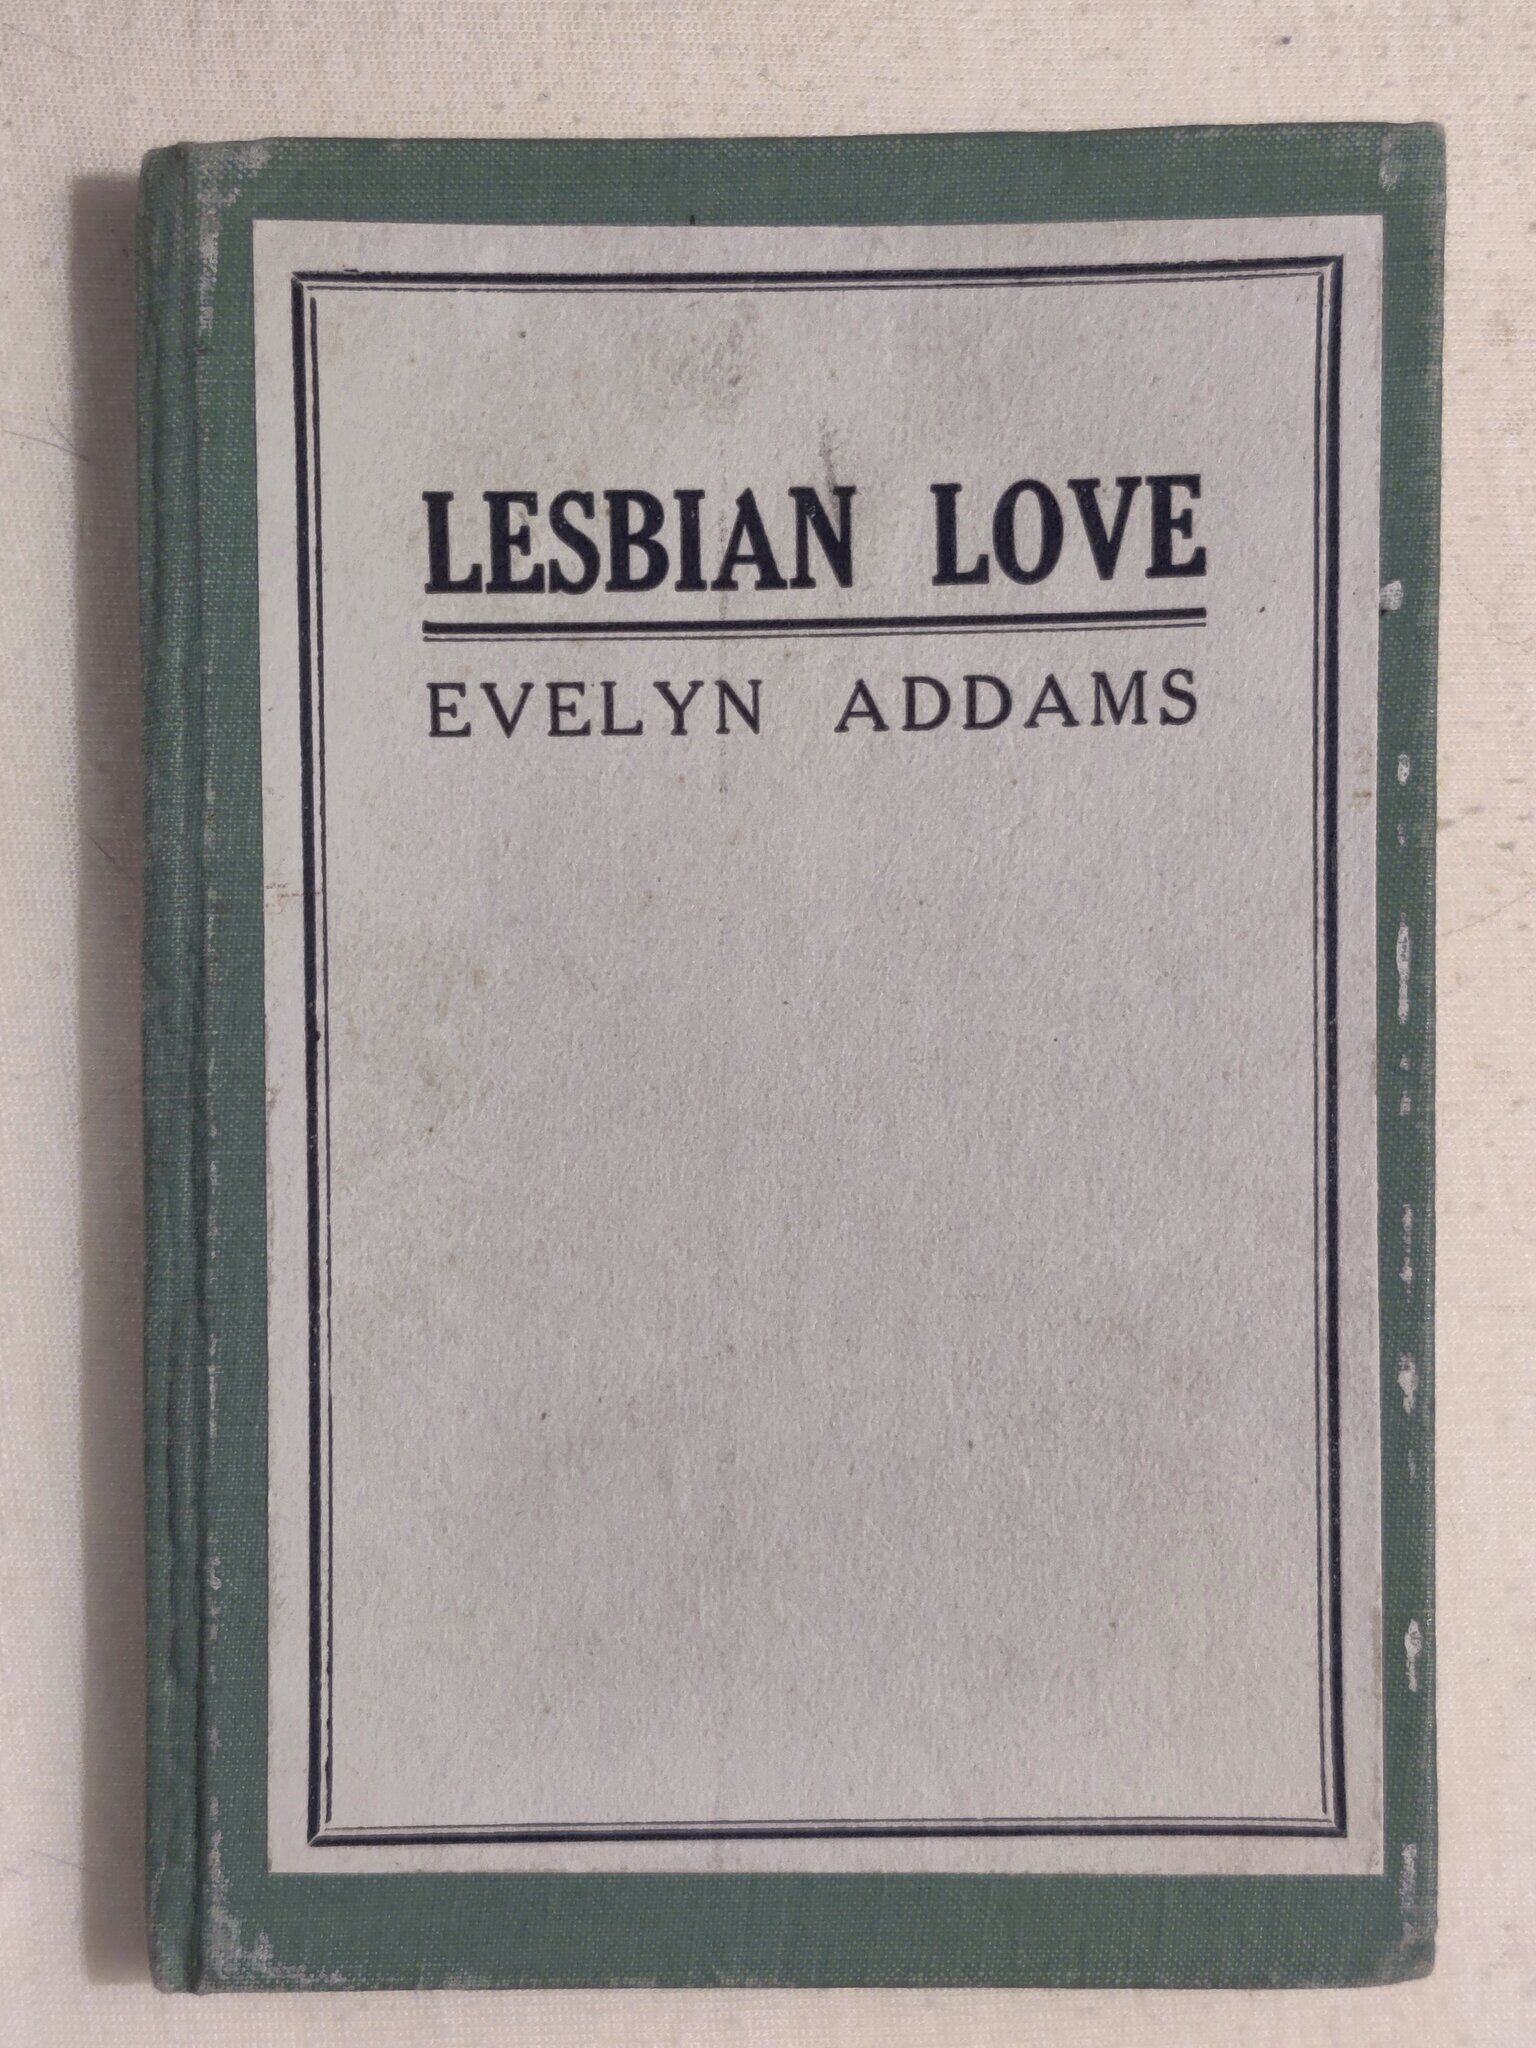 The only known original copy of "Lesbian Love."